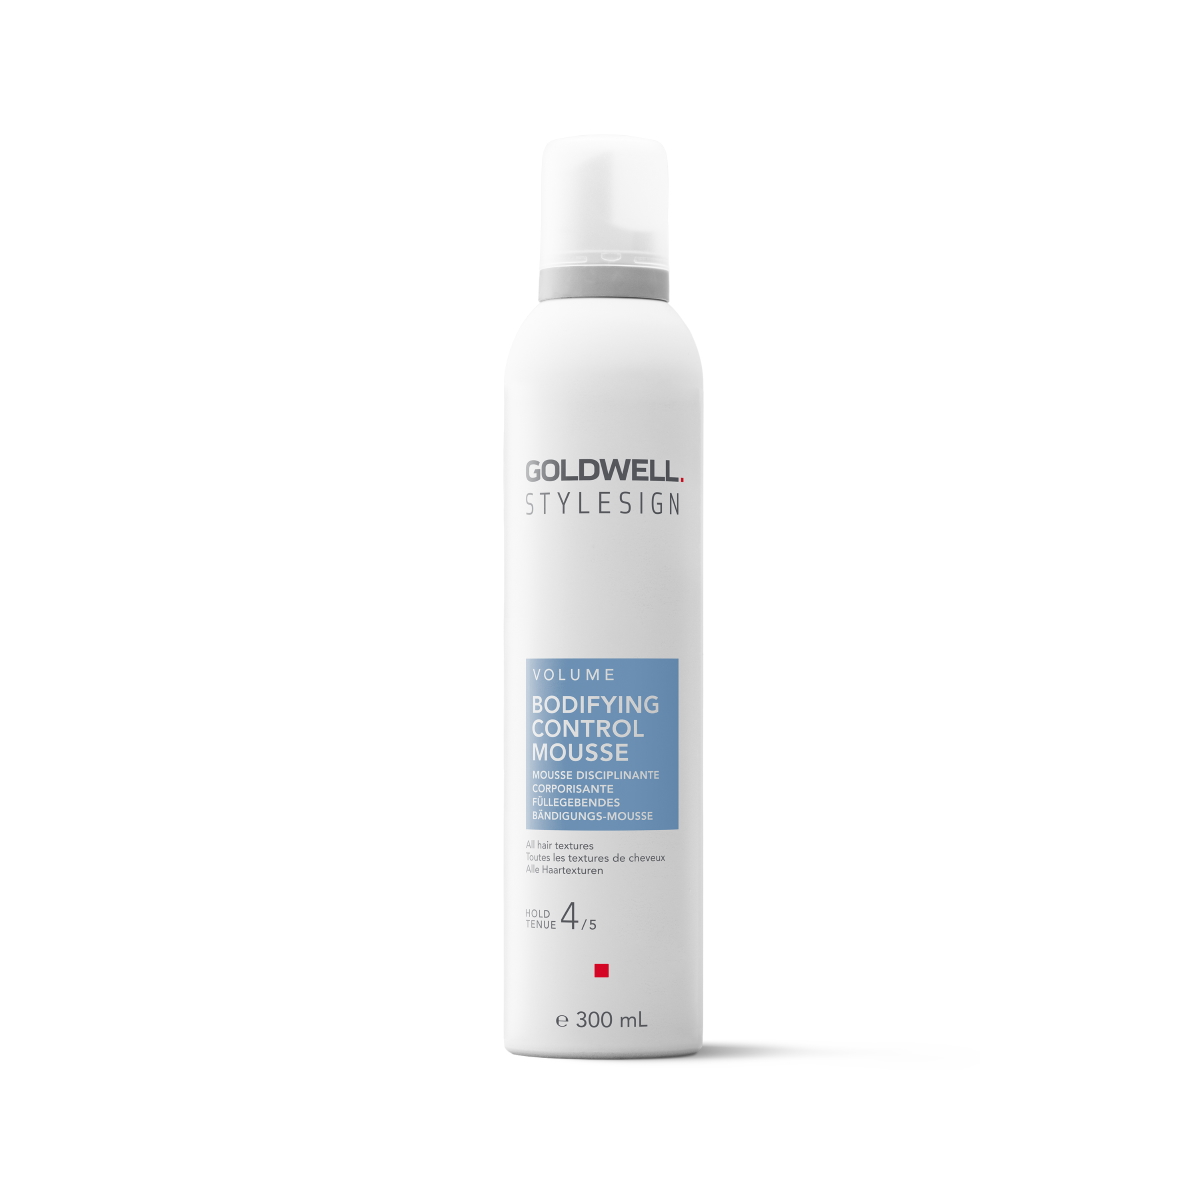 Goldwell Style Sign Volume Bodifying Control Mousse 300ml